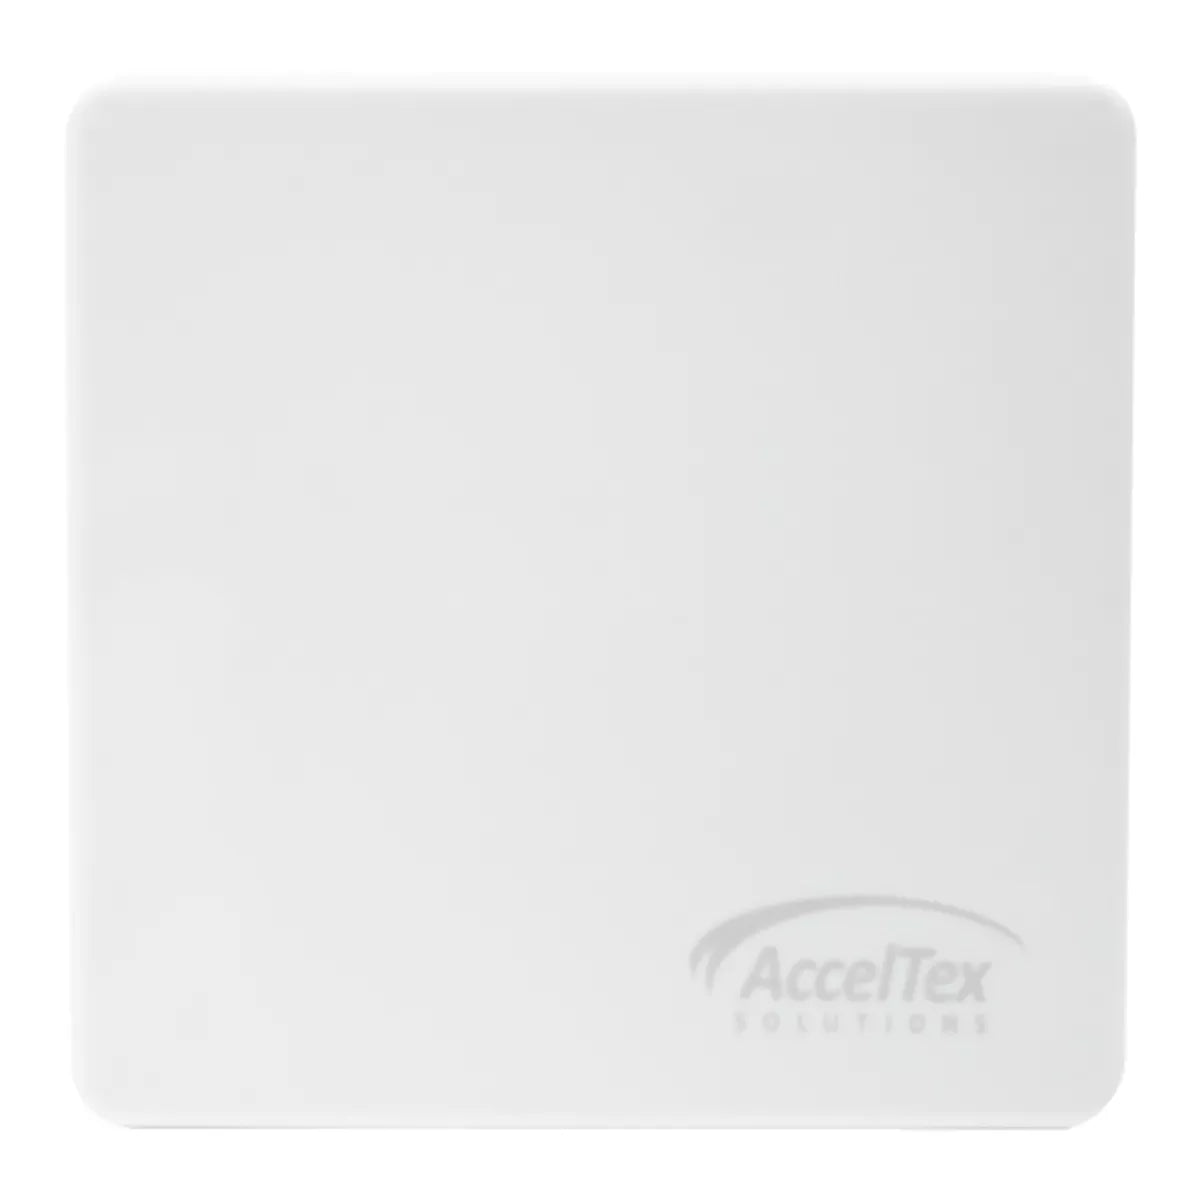 ATS-OP-245-810-Front-1_1200 Acceltex 2.4/5 GHz 8/10 dBi 4 Element Indoor/Outdoor Patch Antenna with N-Style V2 Wi-Fi Antennas acceltex acceltex antennas acceltex patch antenna acceltex solutions wifi antennen wlan antennen